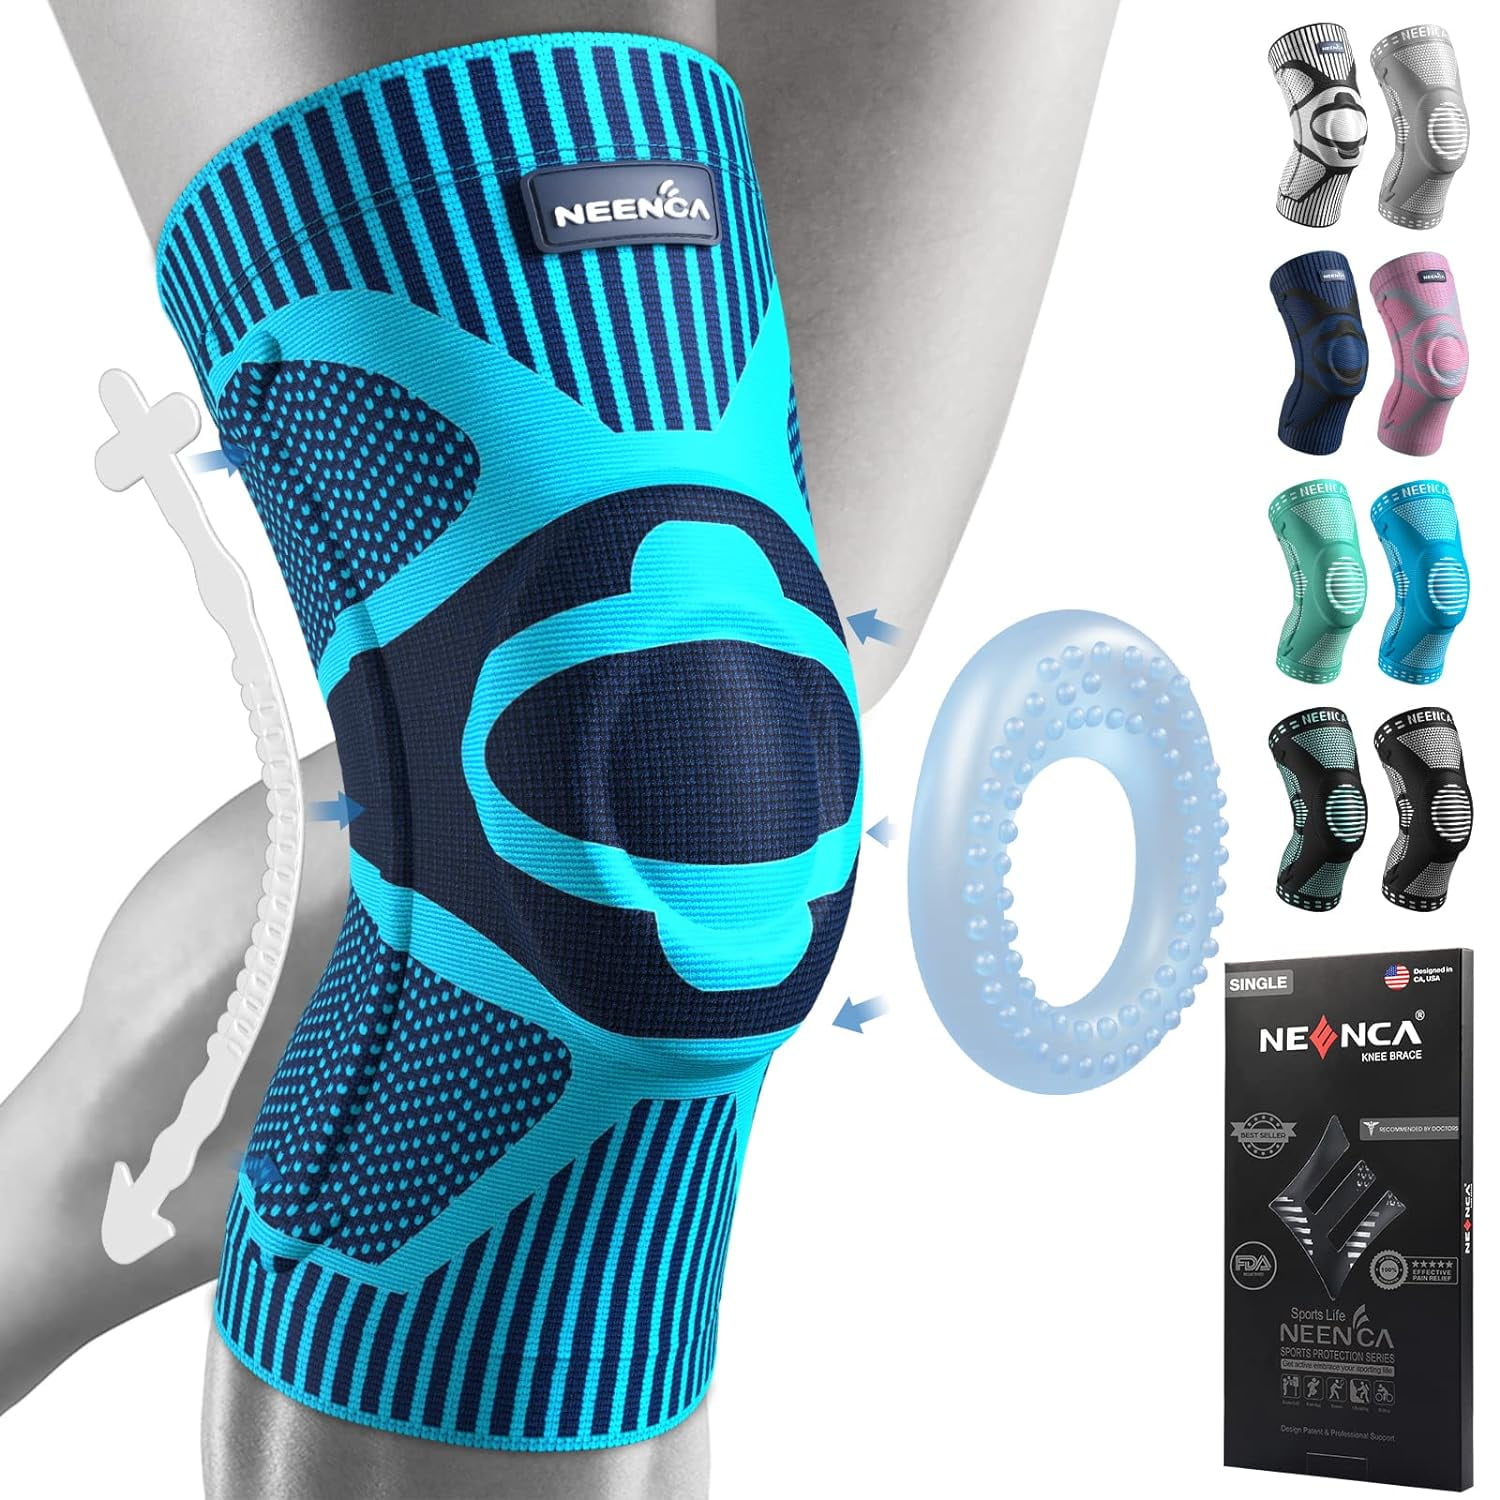 NEENCA Knee Braces for Knee Pain Relief, Compression Knee Sleeves with  Patella Gel Pad & Side Stabilizers, Knee Support for Weightlifting,  Running, Workout, Arthritis, Meniscus Tear, Men Women. ACE-53 Large Light  Blue 